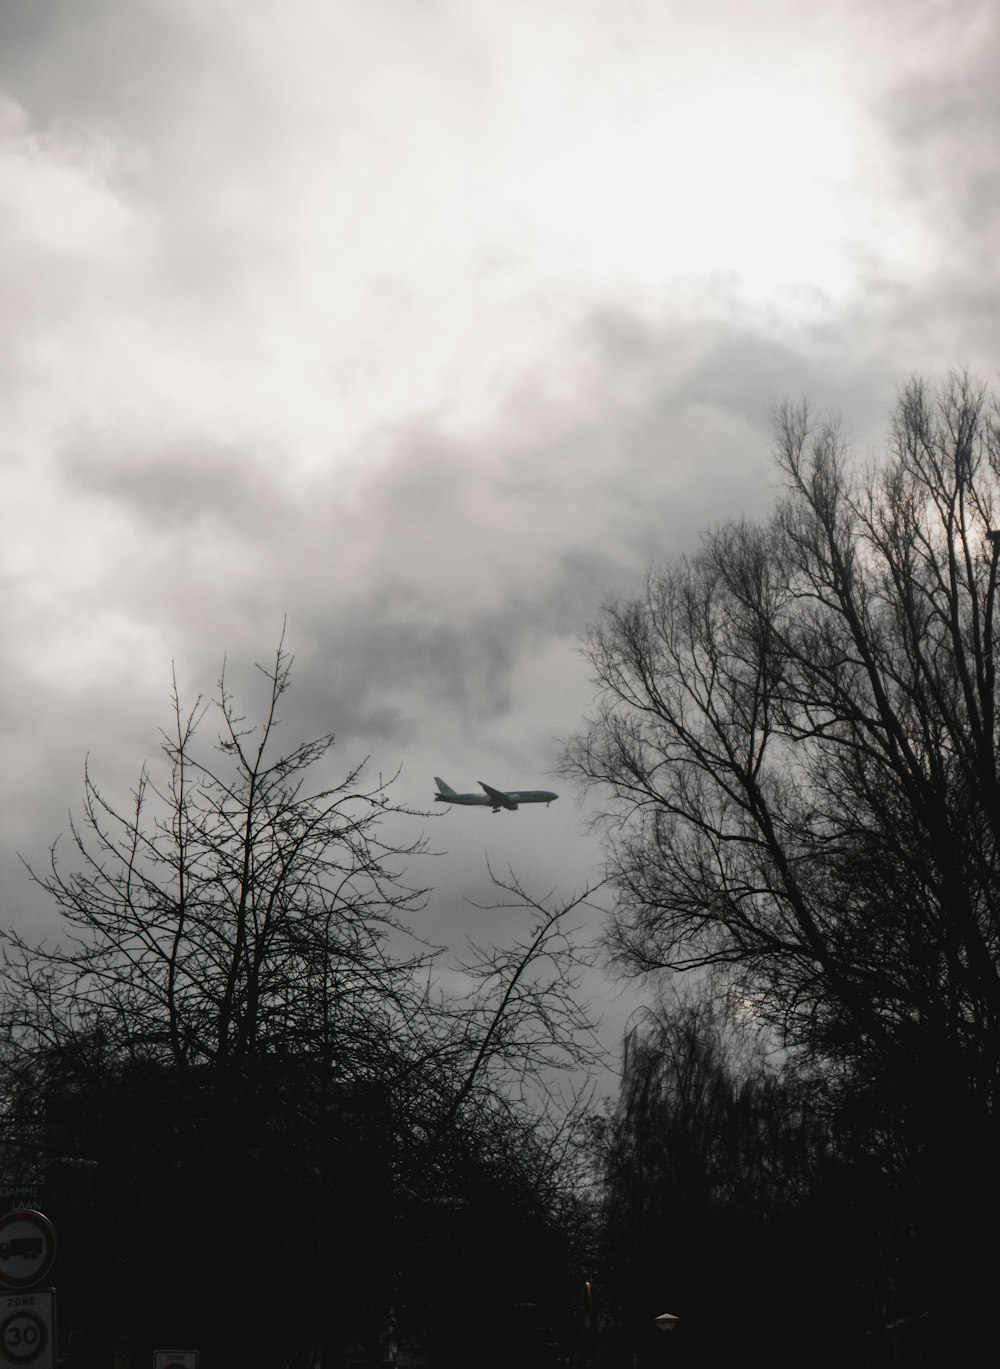 a plane is flying in the cloudy sky